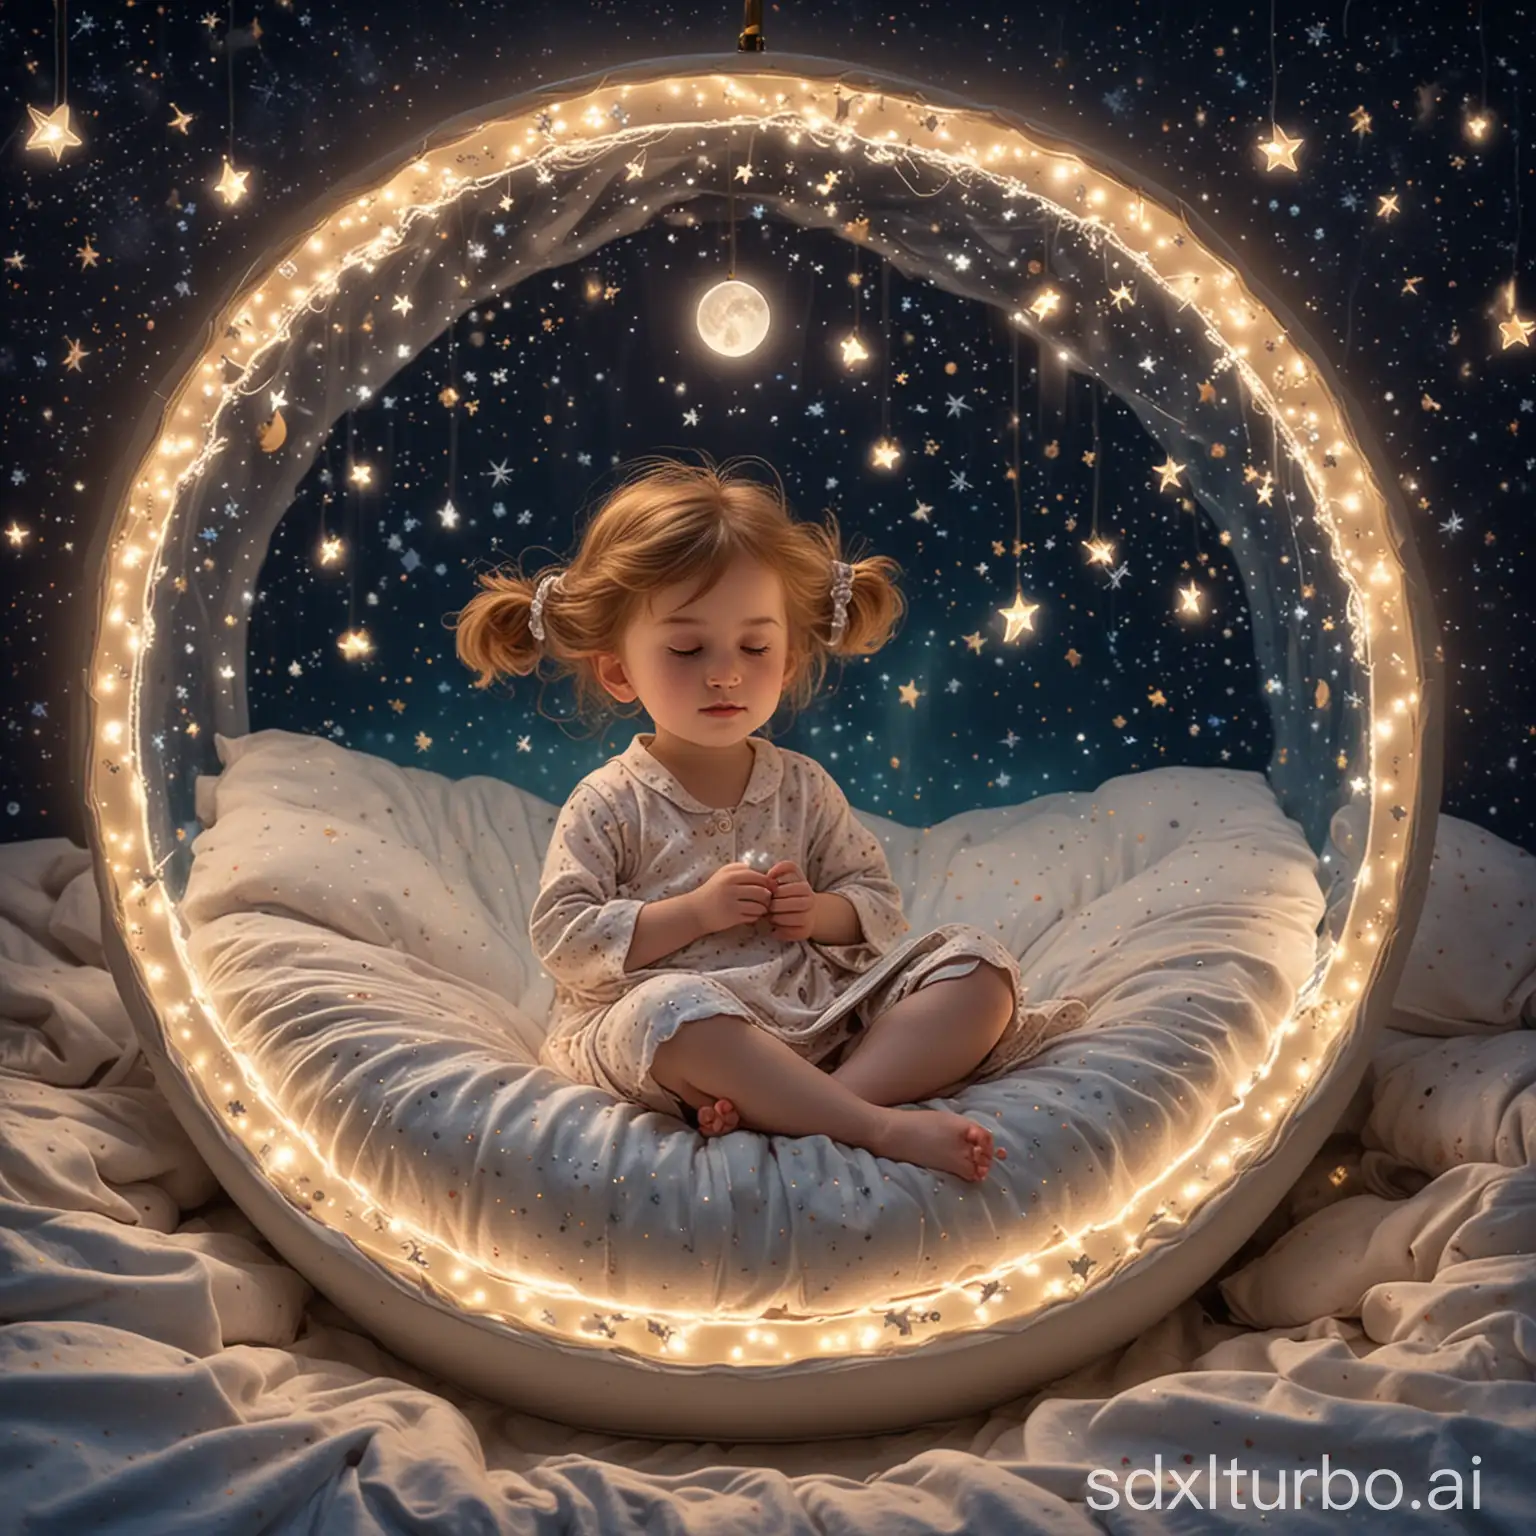 A little girl lies in a round bed, shaped like the moon. She wears a delicate pajamas with sparkling stars and holds a plush moon. A soft melody from a music box lulls her to sleep, while glowing constellations dance on the ceiling.